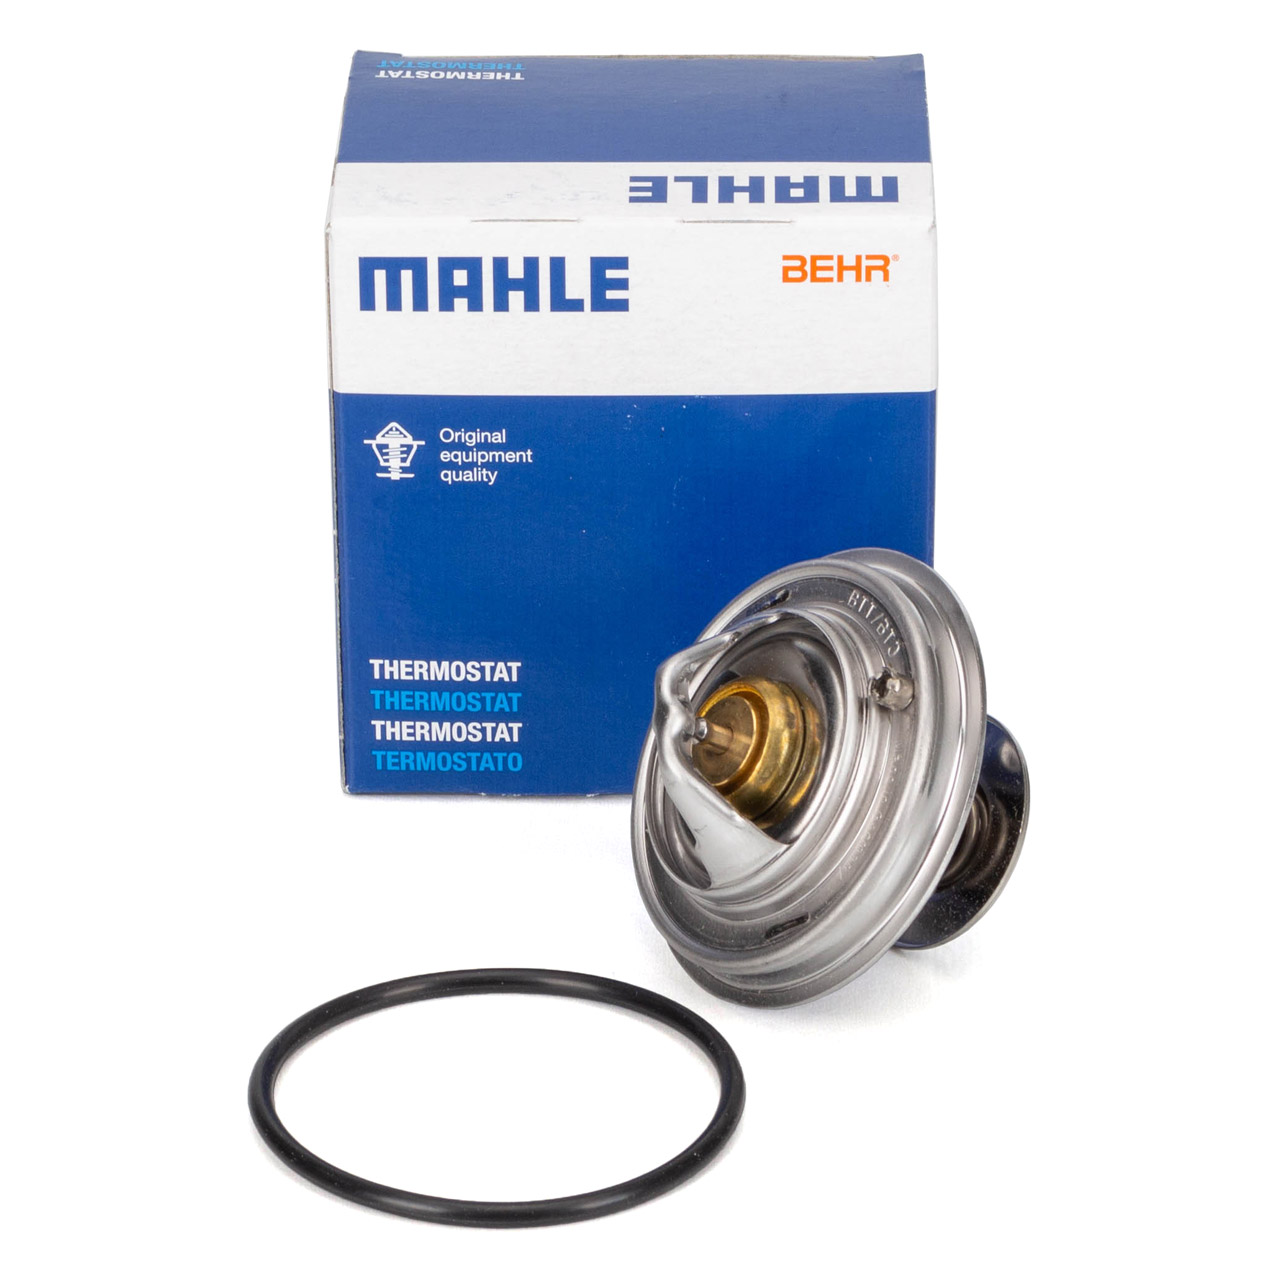 https://www.ws-autoteile.com/img/MAHLE_THERMOSTAT_KUEHLMITTEL_TX3087D_A18013W024_202302201522_99.jpg